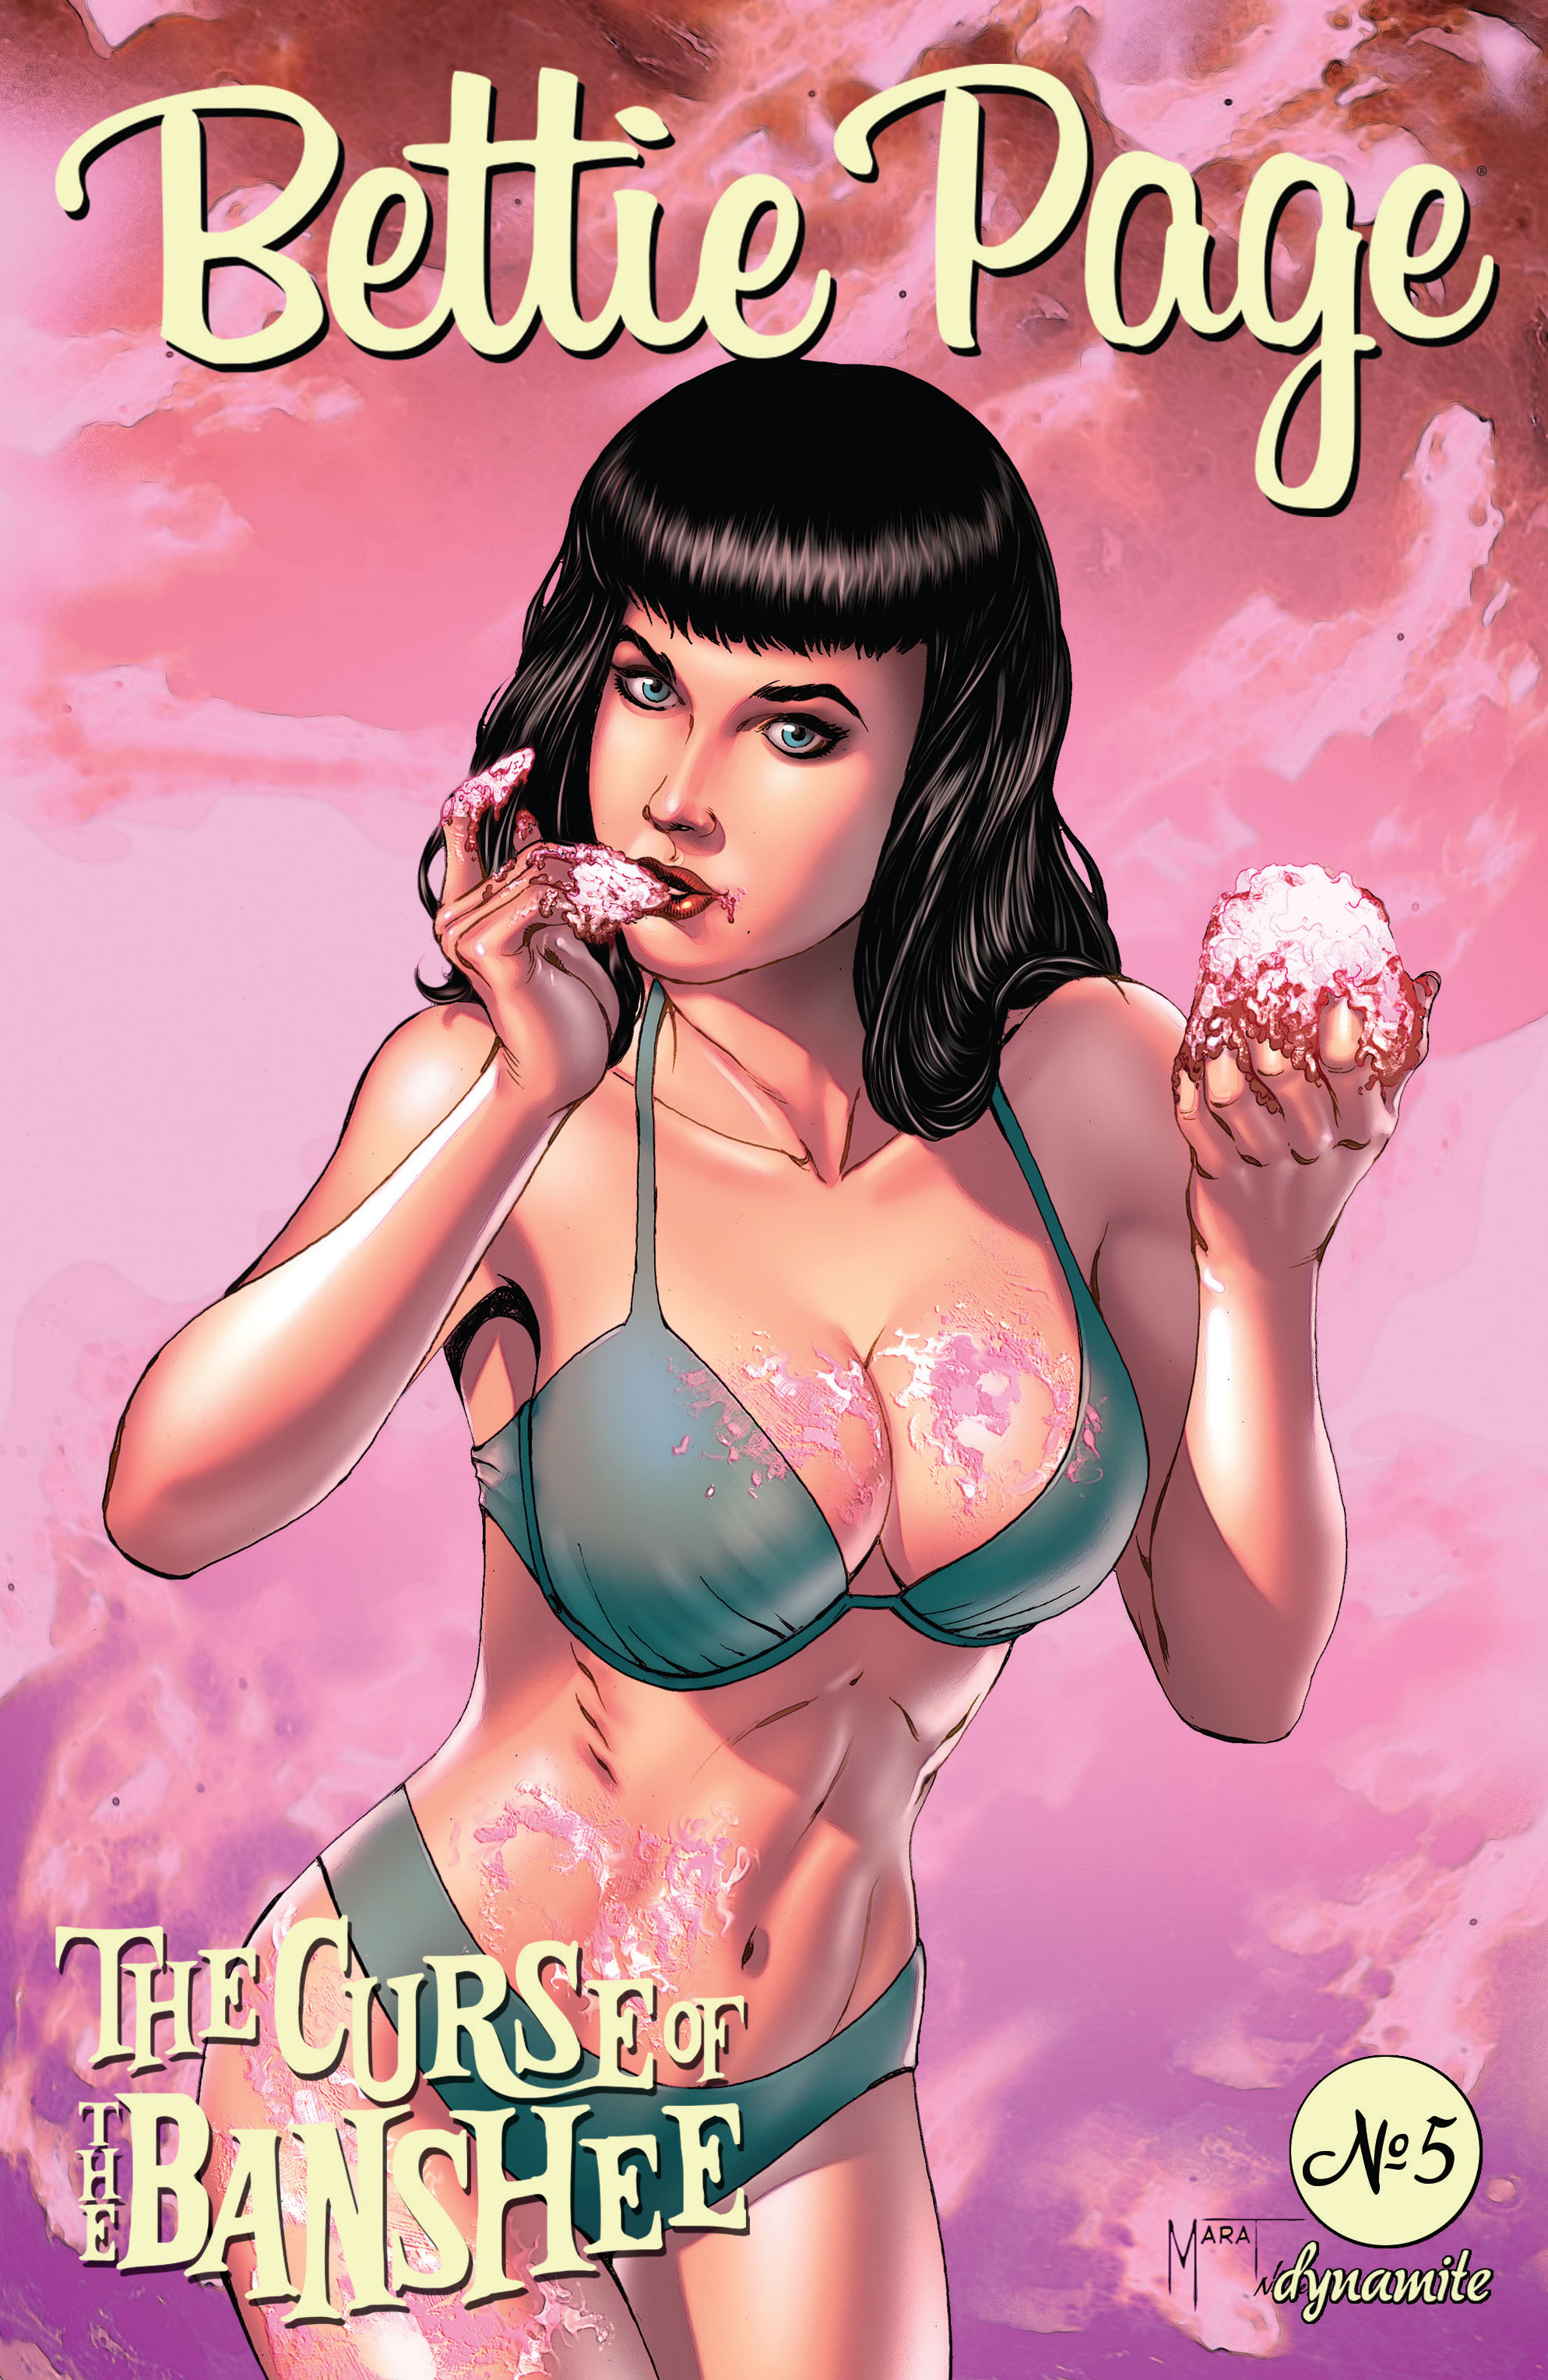 Read online Bettie Page & The Curse of the Banshee comic -  Issue #5 - 1